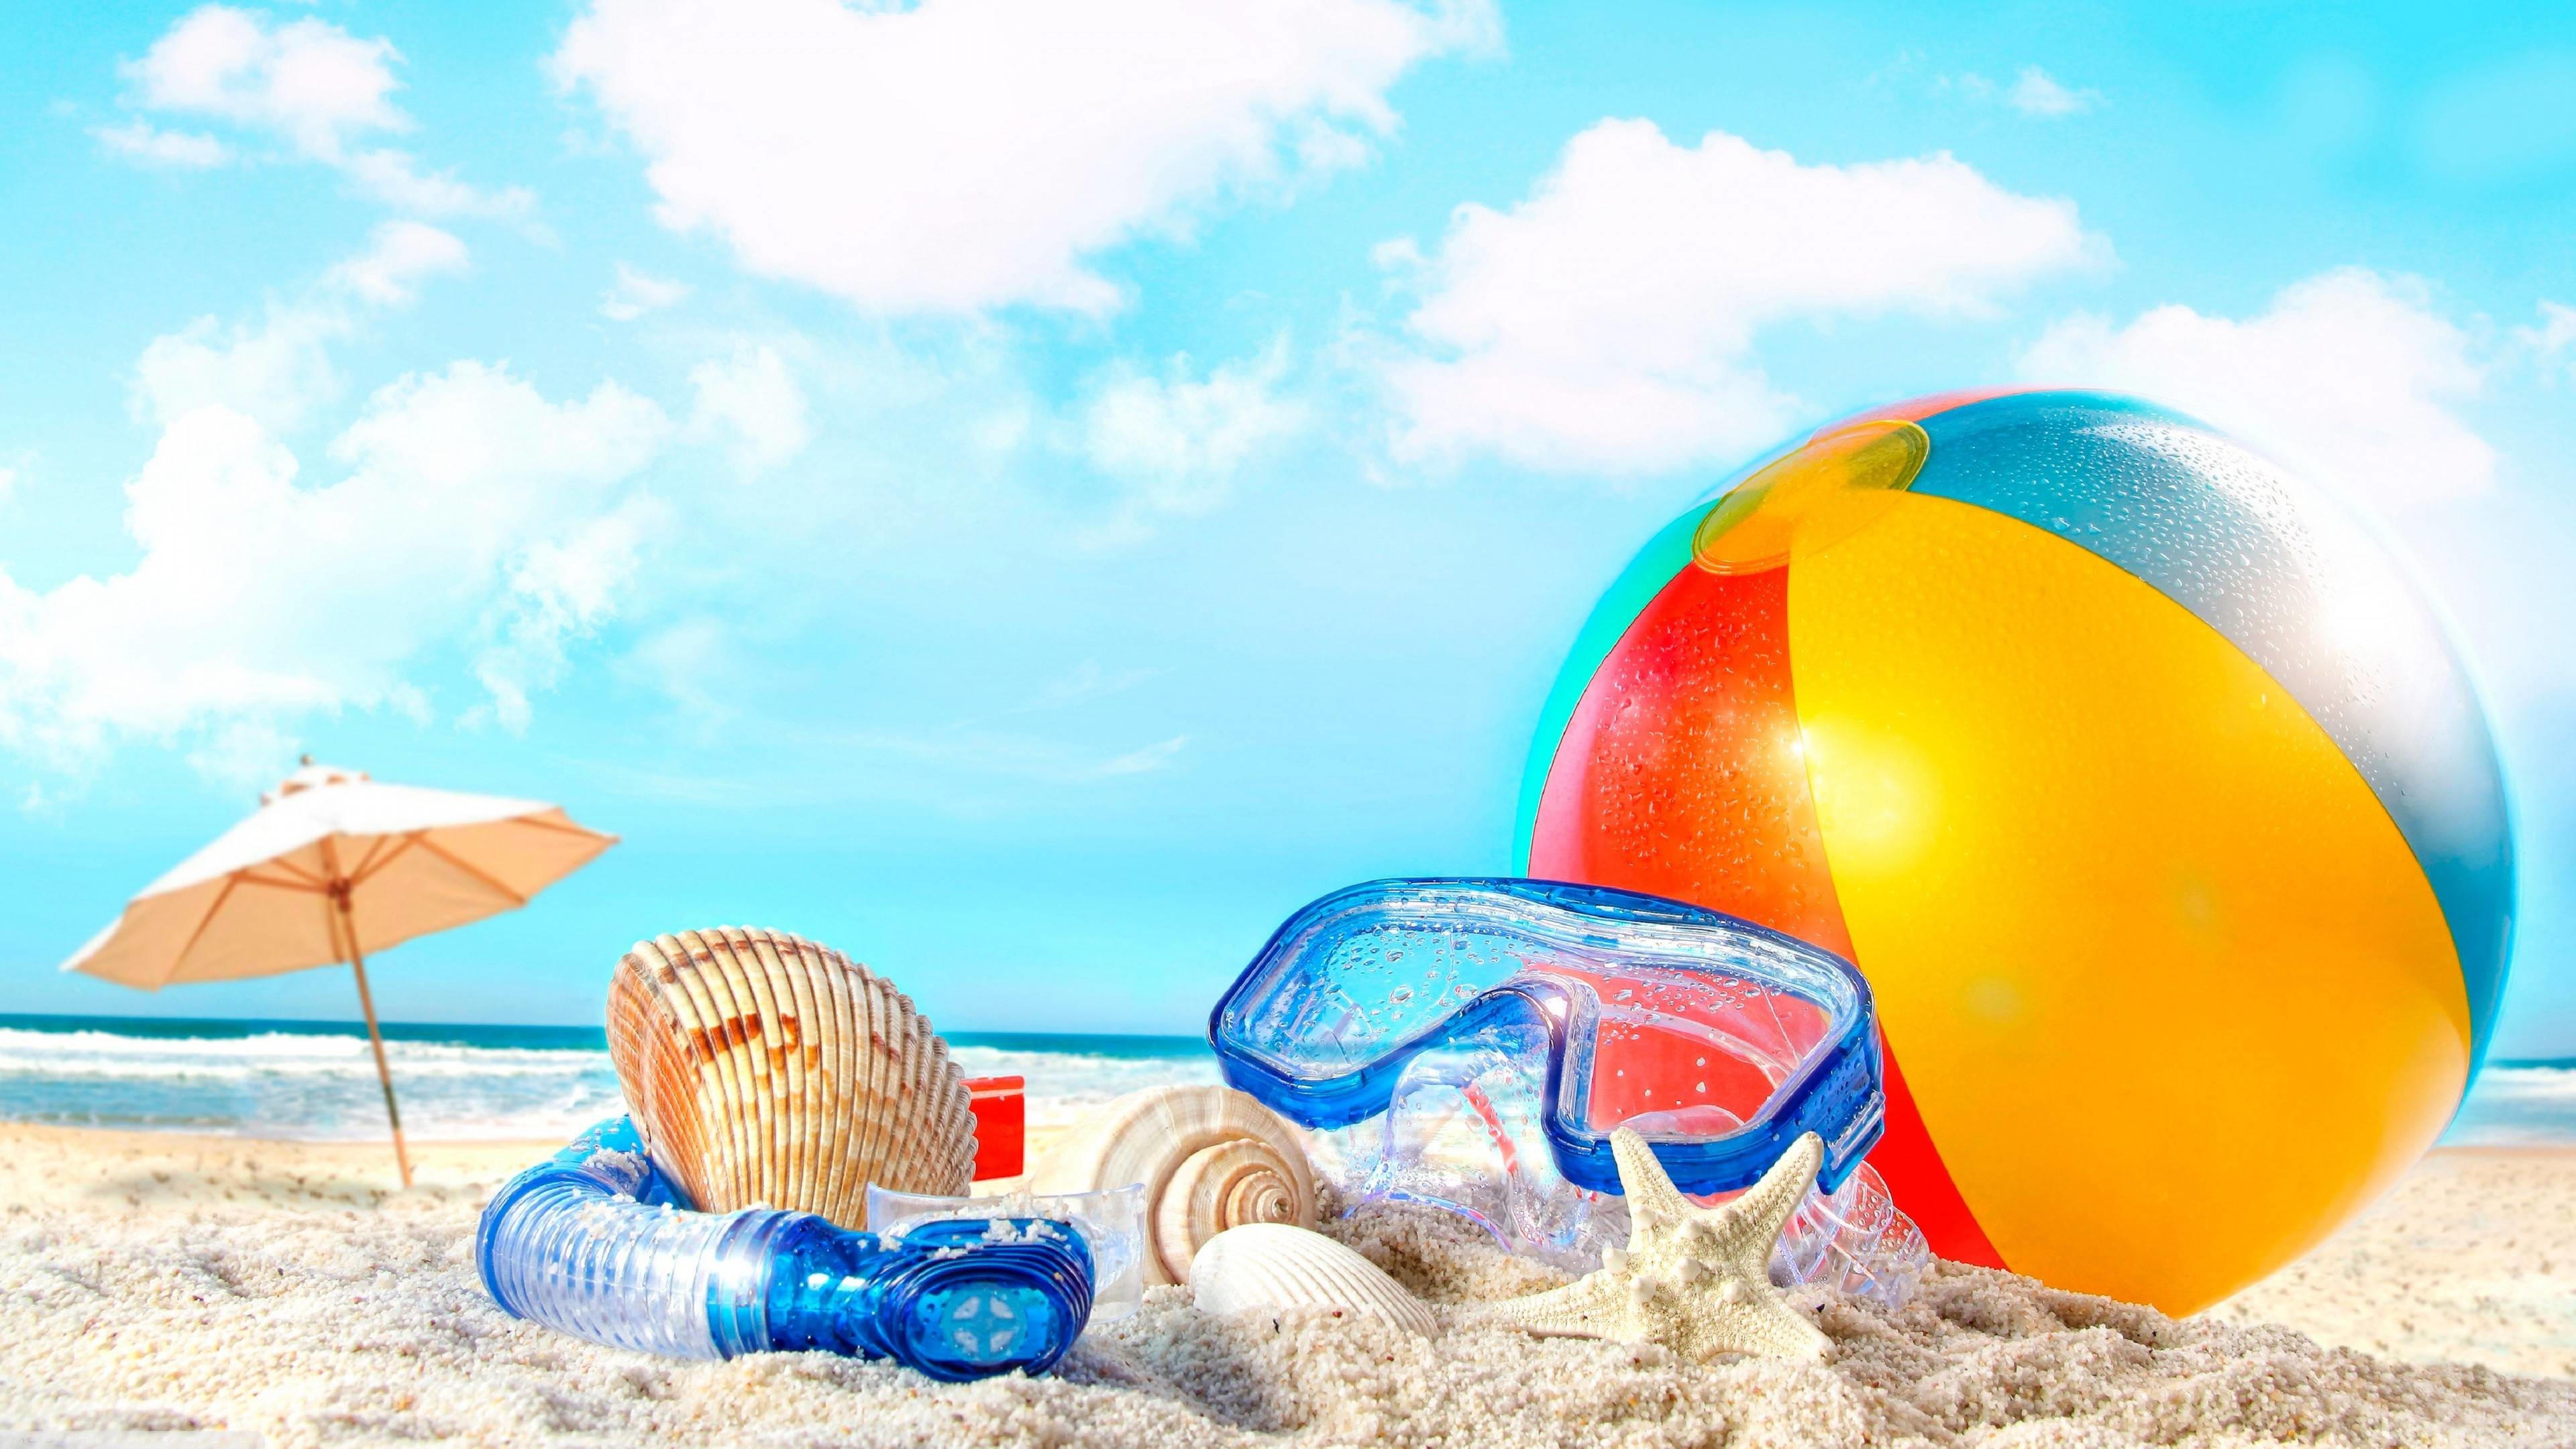 3840x2160 Summer-Holliday-in-the-Beach-Wallpaper-1080p